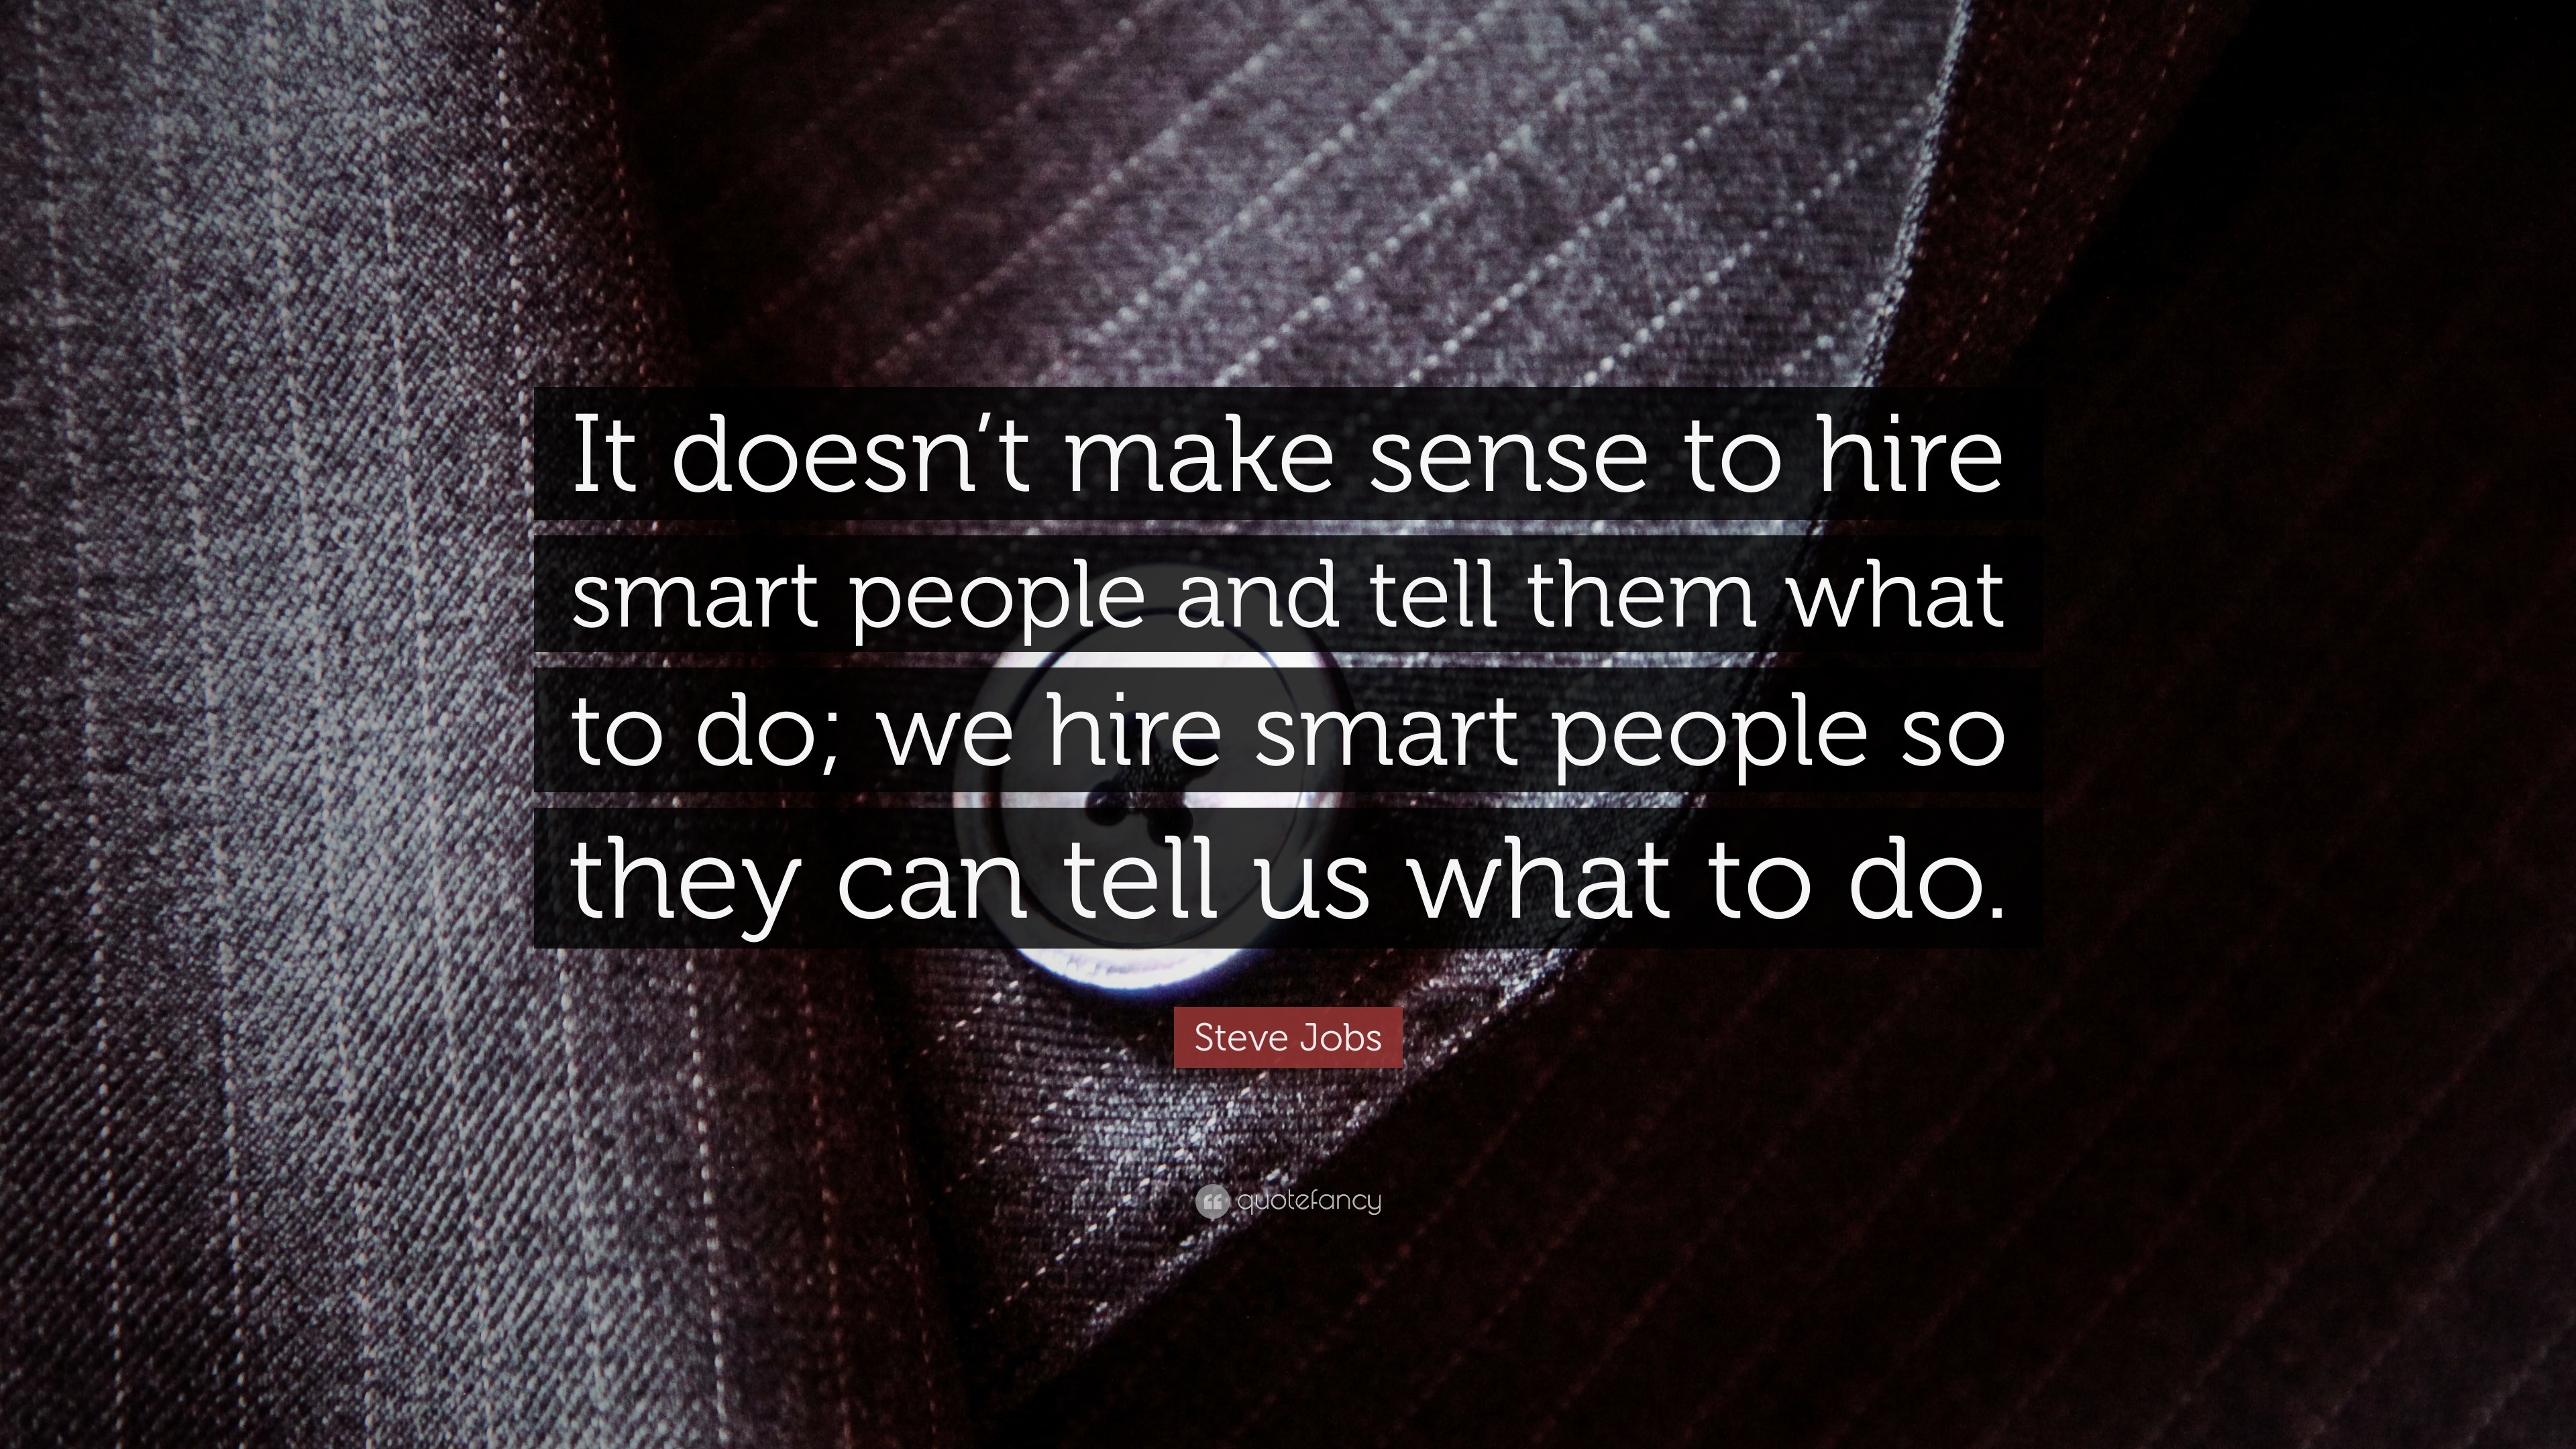 Steve Jobs Quote “It doesn t make sense to hire smart people and